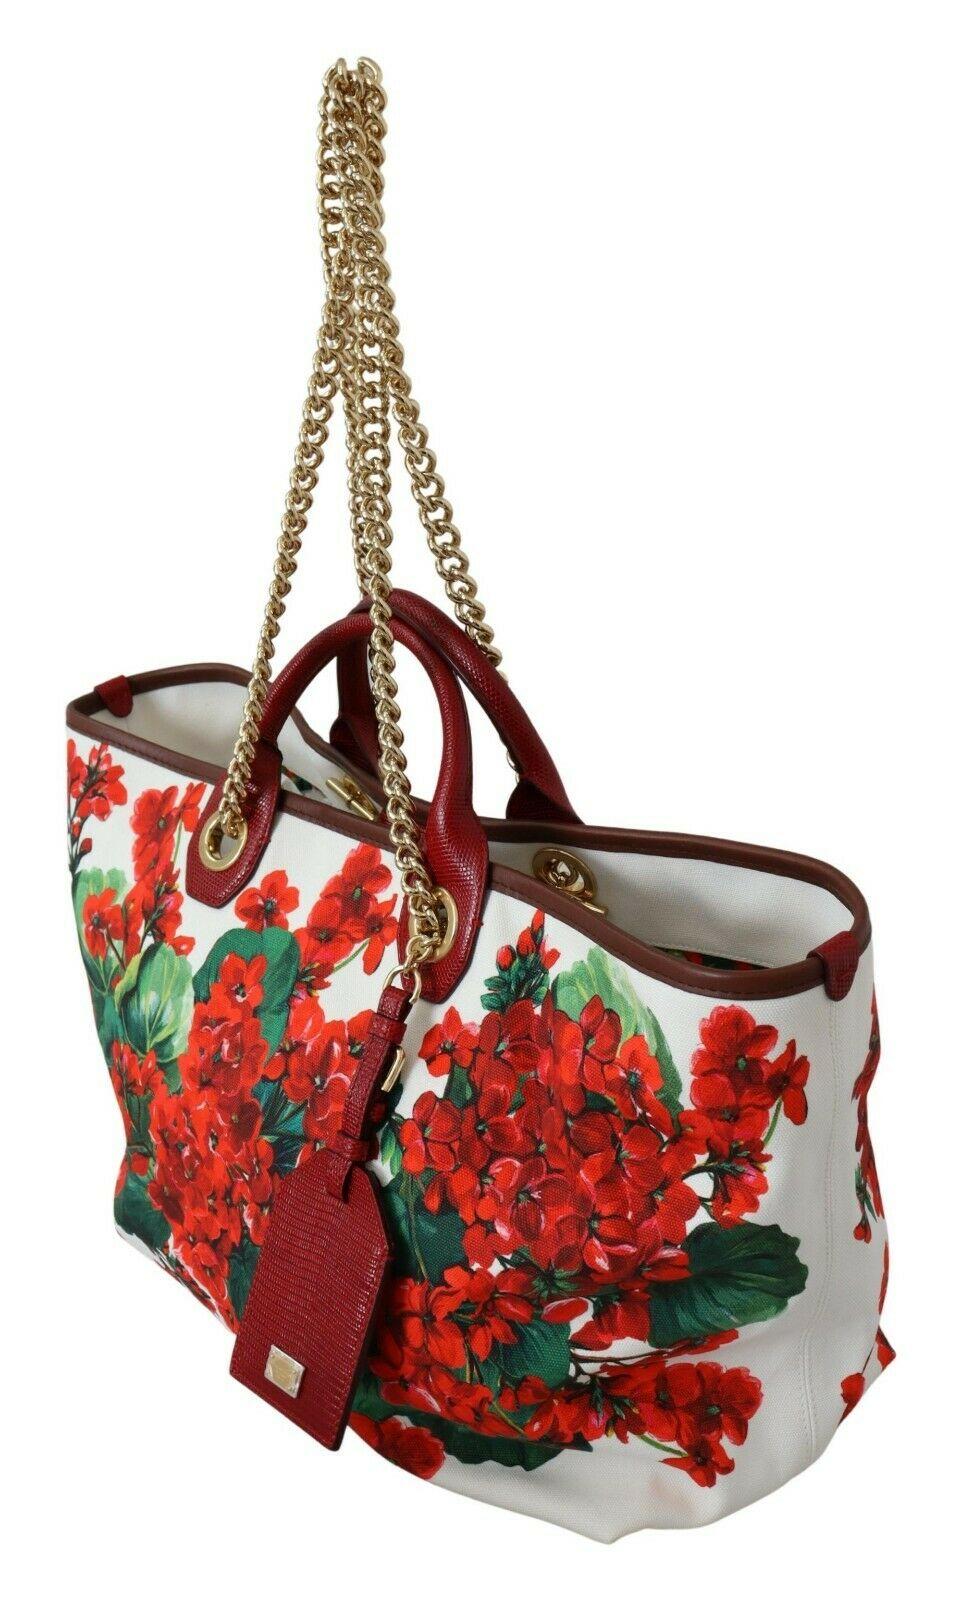 Gorgeous brand new with tags, 100% Authentic Dolce & Gabbana CAPRI cotton tote bag with geranium print features a chain shoulder strap.

Model: CAPRI Tote bag
Material: 90% Cotton 10% Leather
Color: White, gold metal detailing
Handle: Two